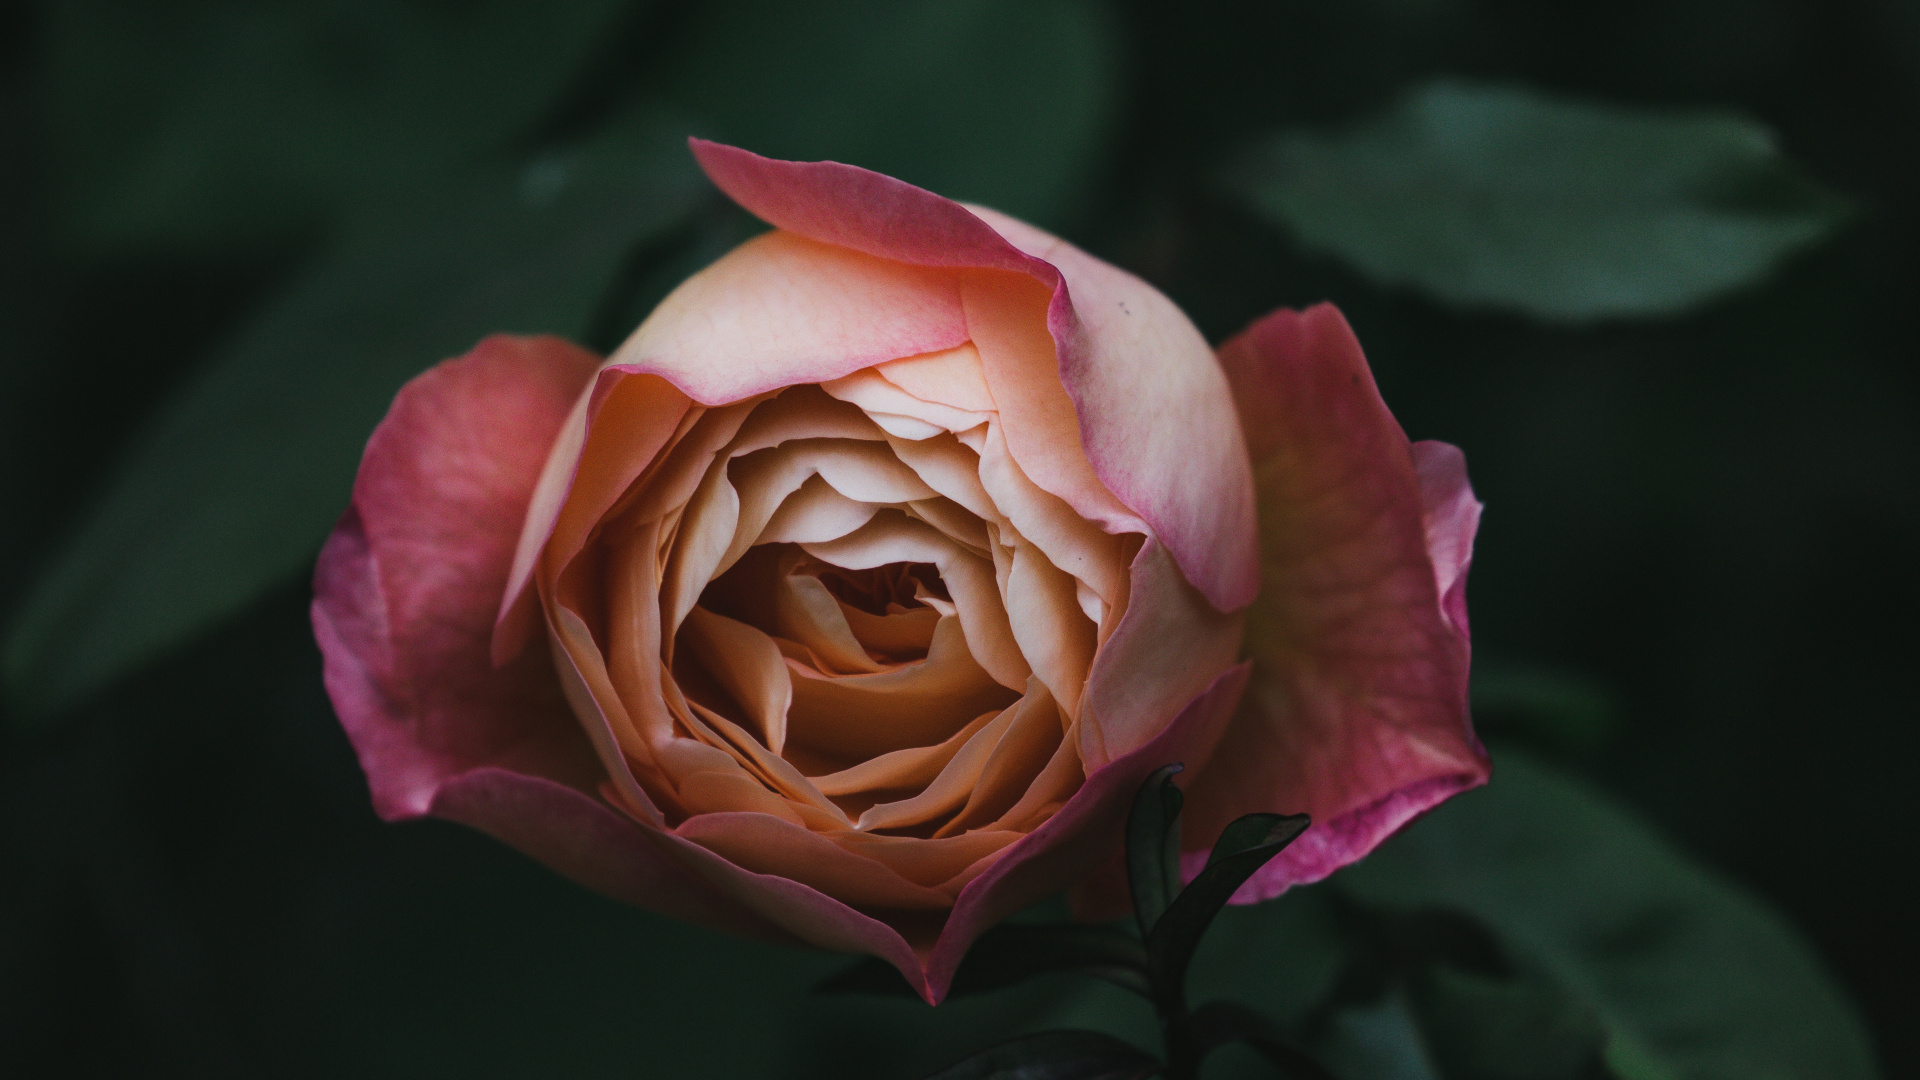 Pink Rose in Bloom Close up Photo. Wallpaper in 1920x1080 Resolution